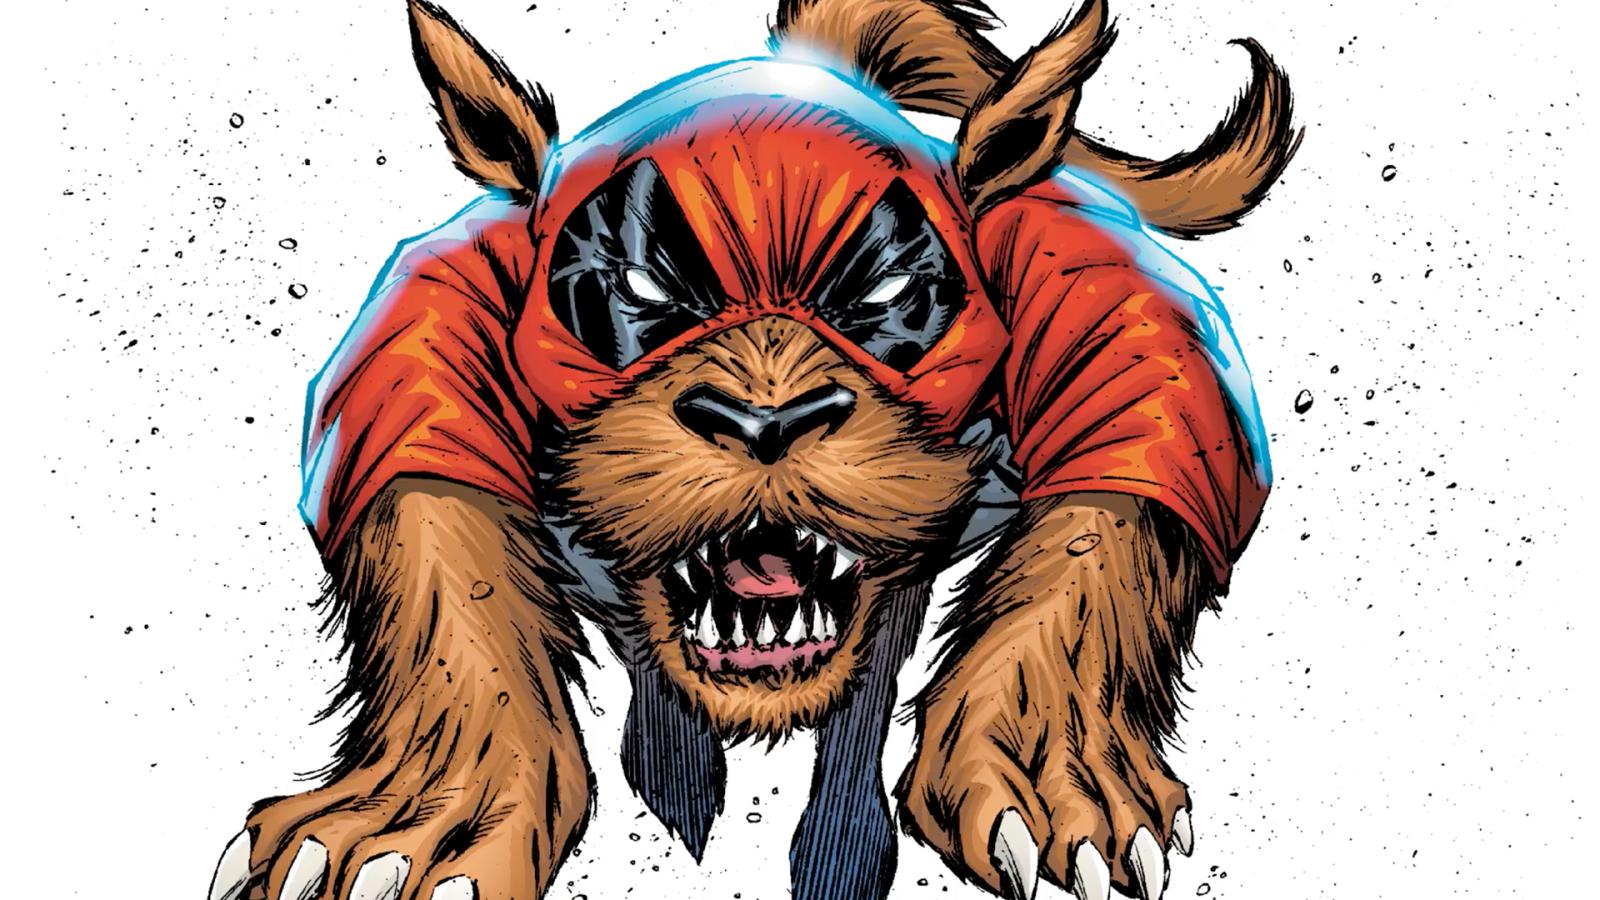 4 Cutest Animal Characters in Marvel We Want to See On Screen - image 2